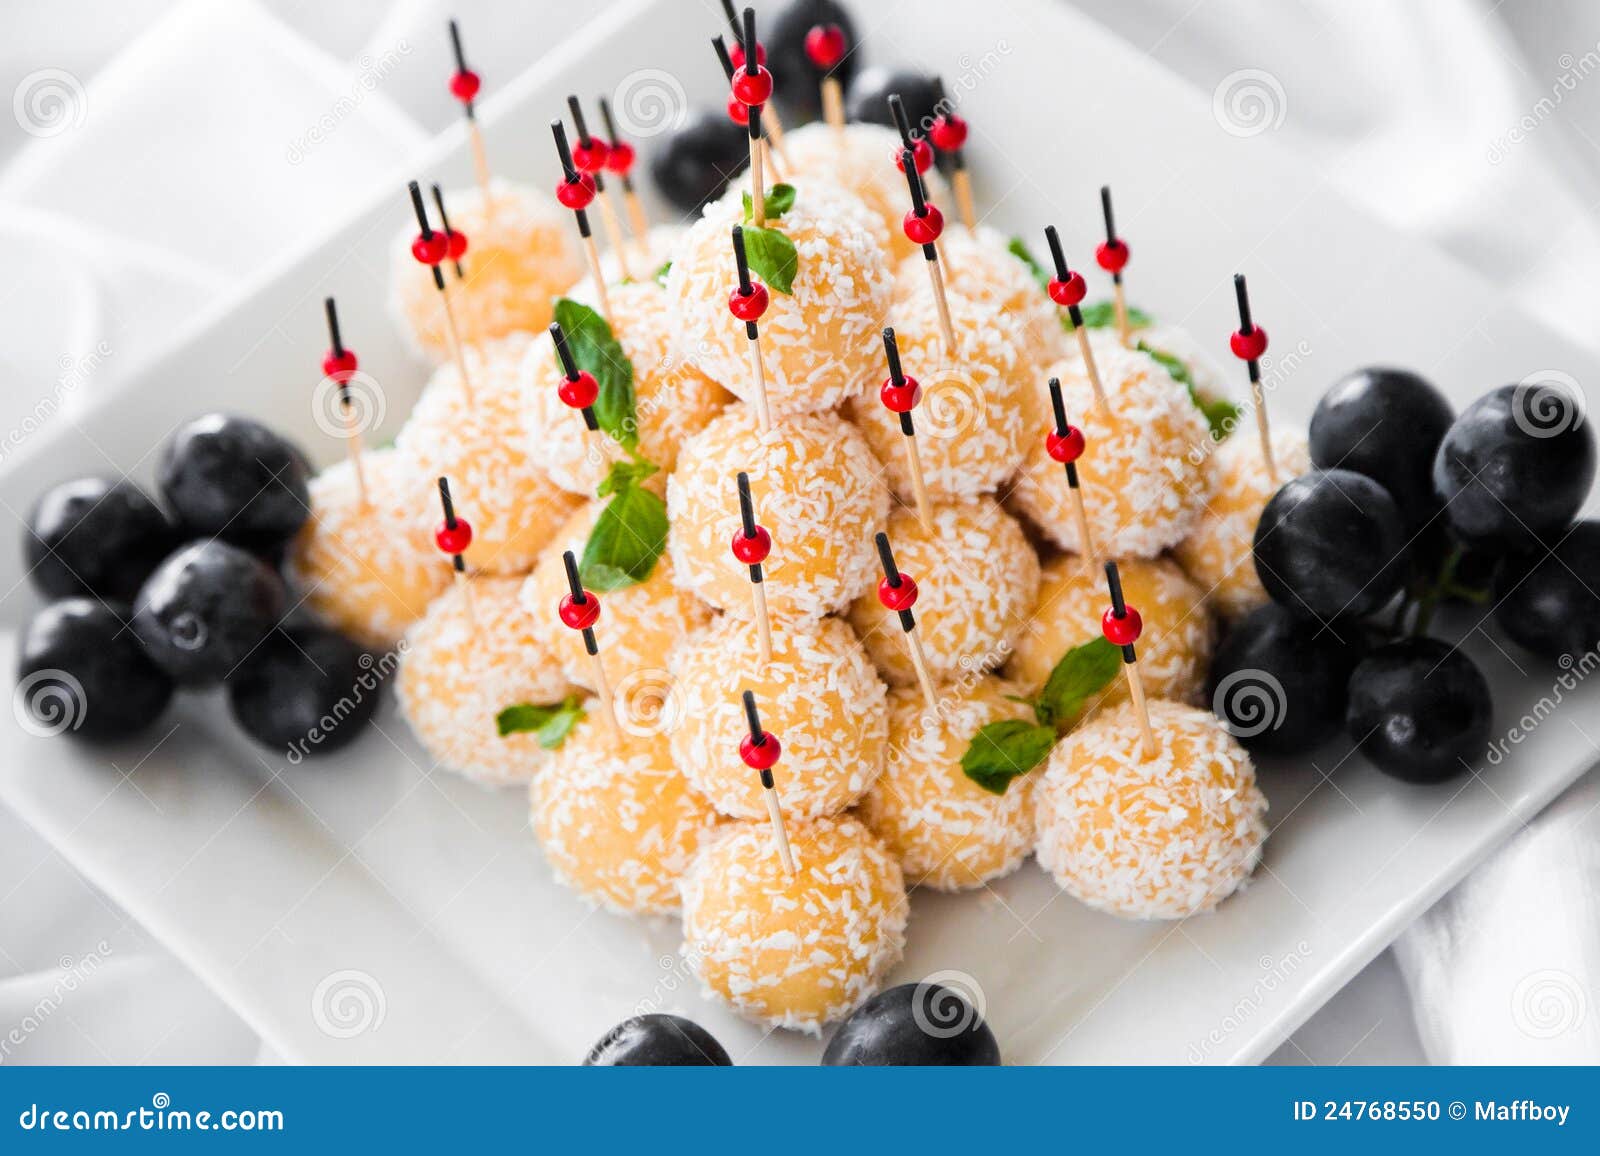 canape with coconut crumb